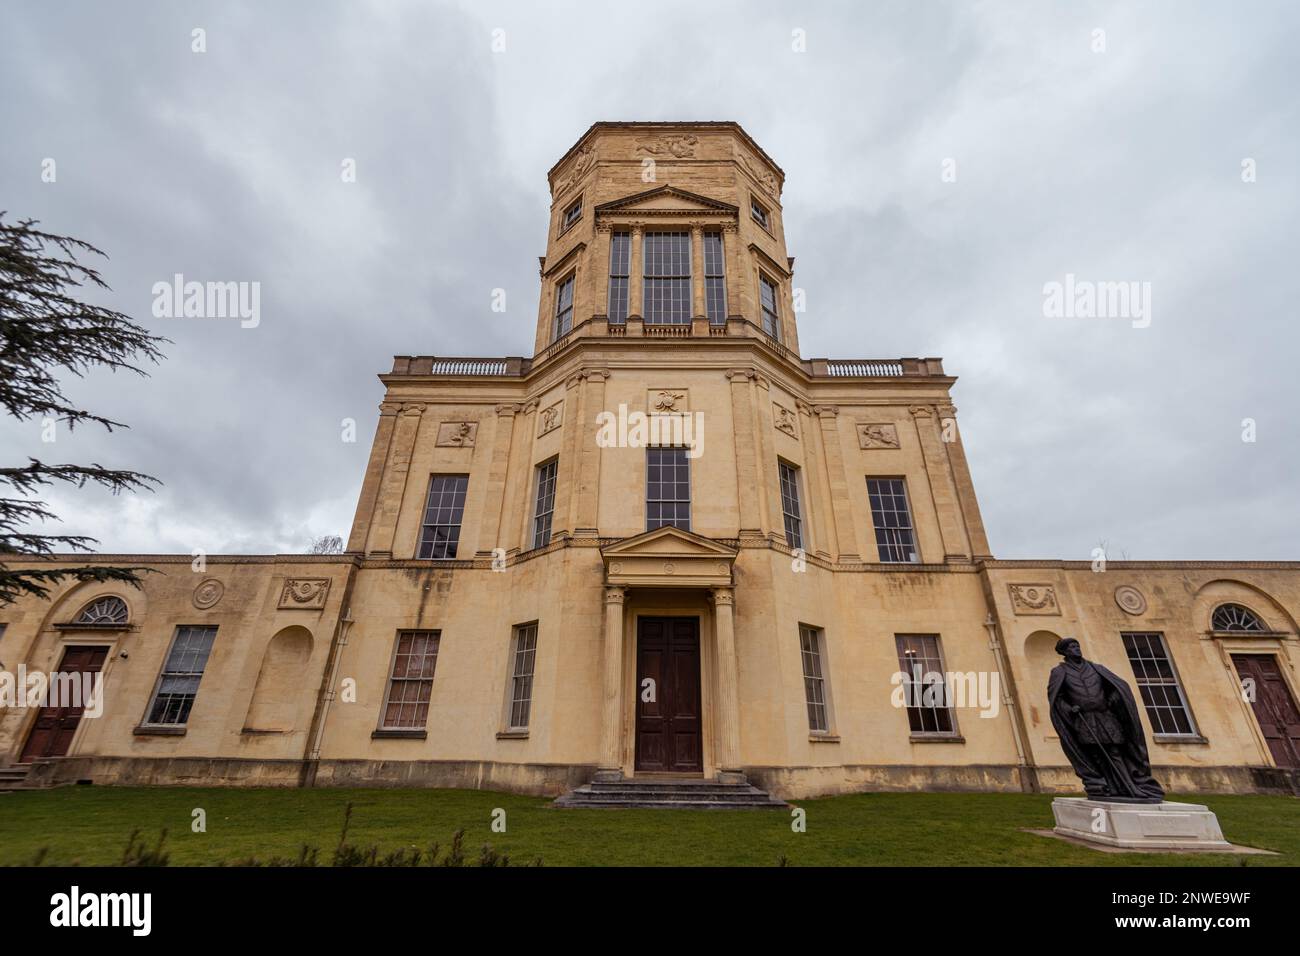 The Radcliffe Observatory, Oxford, UK Stock Photo